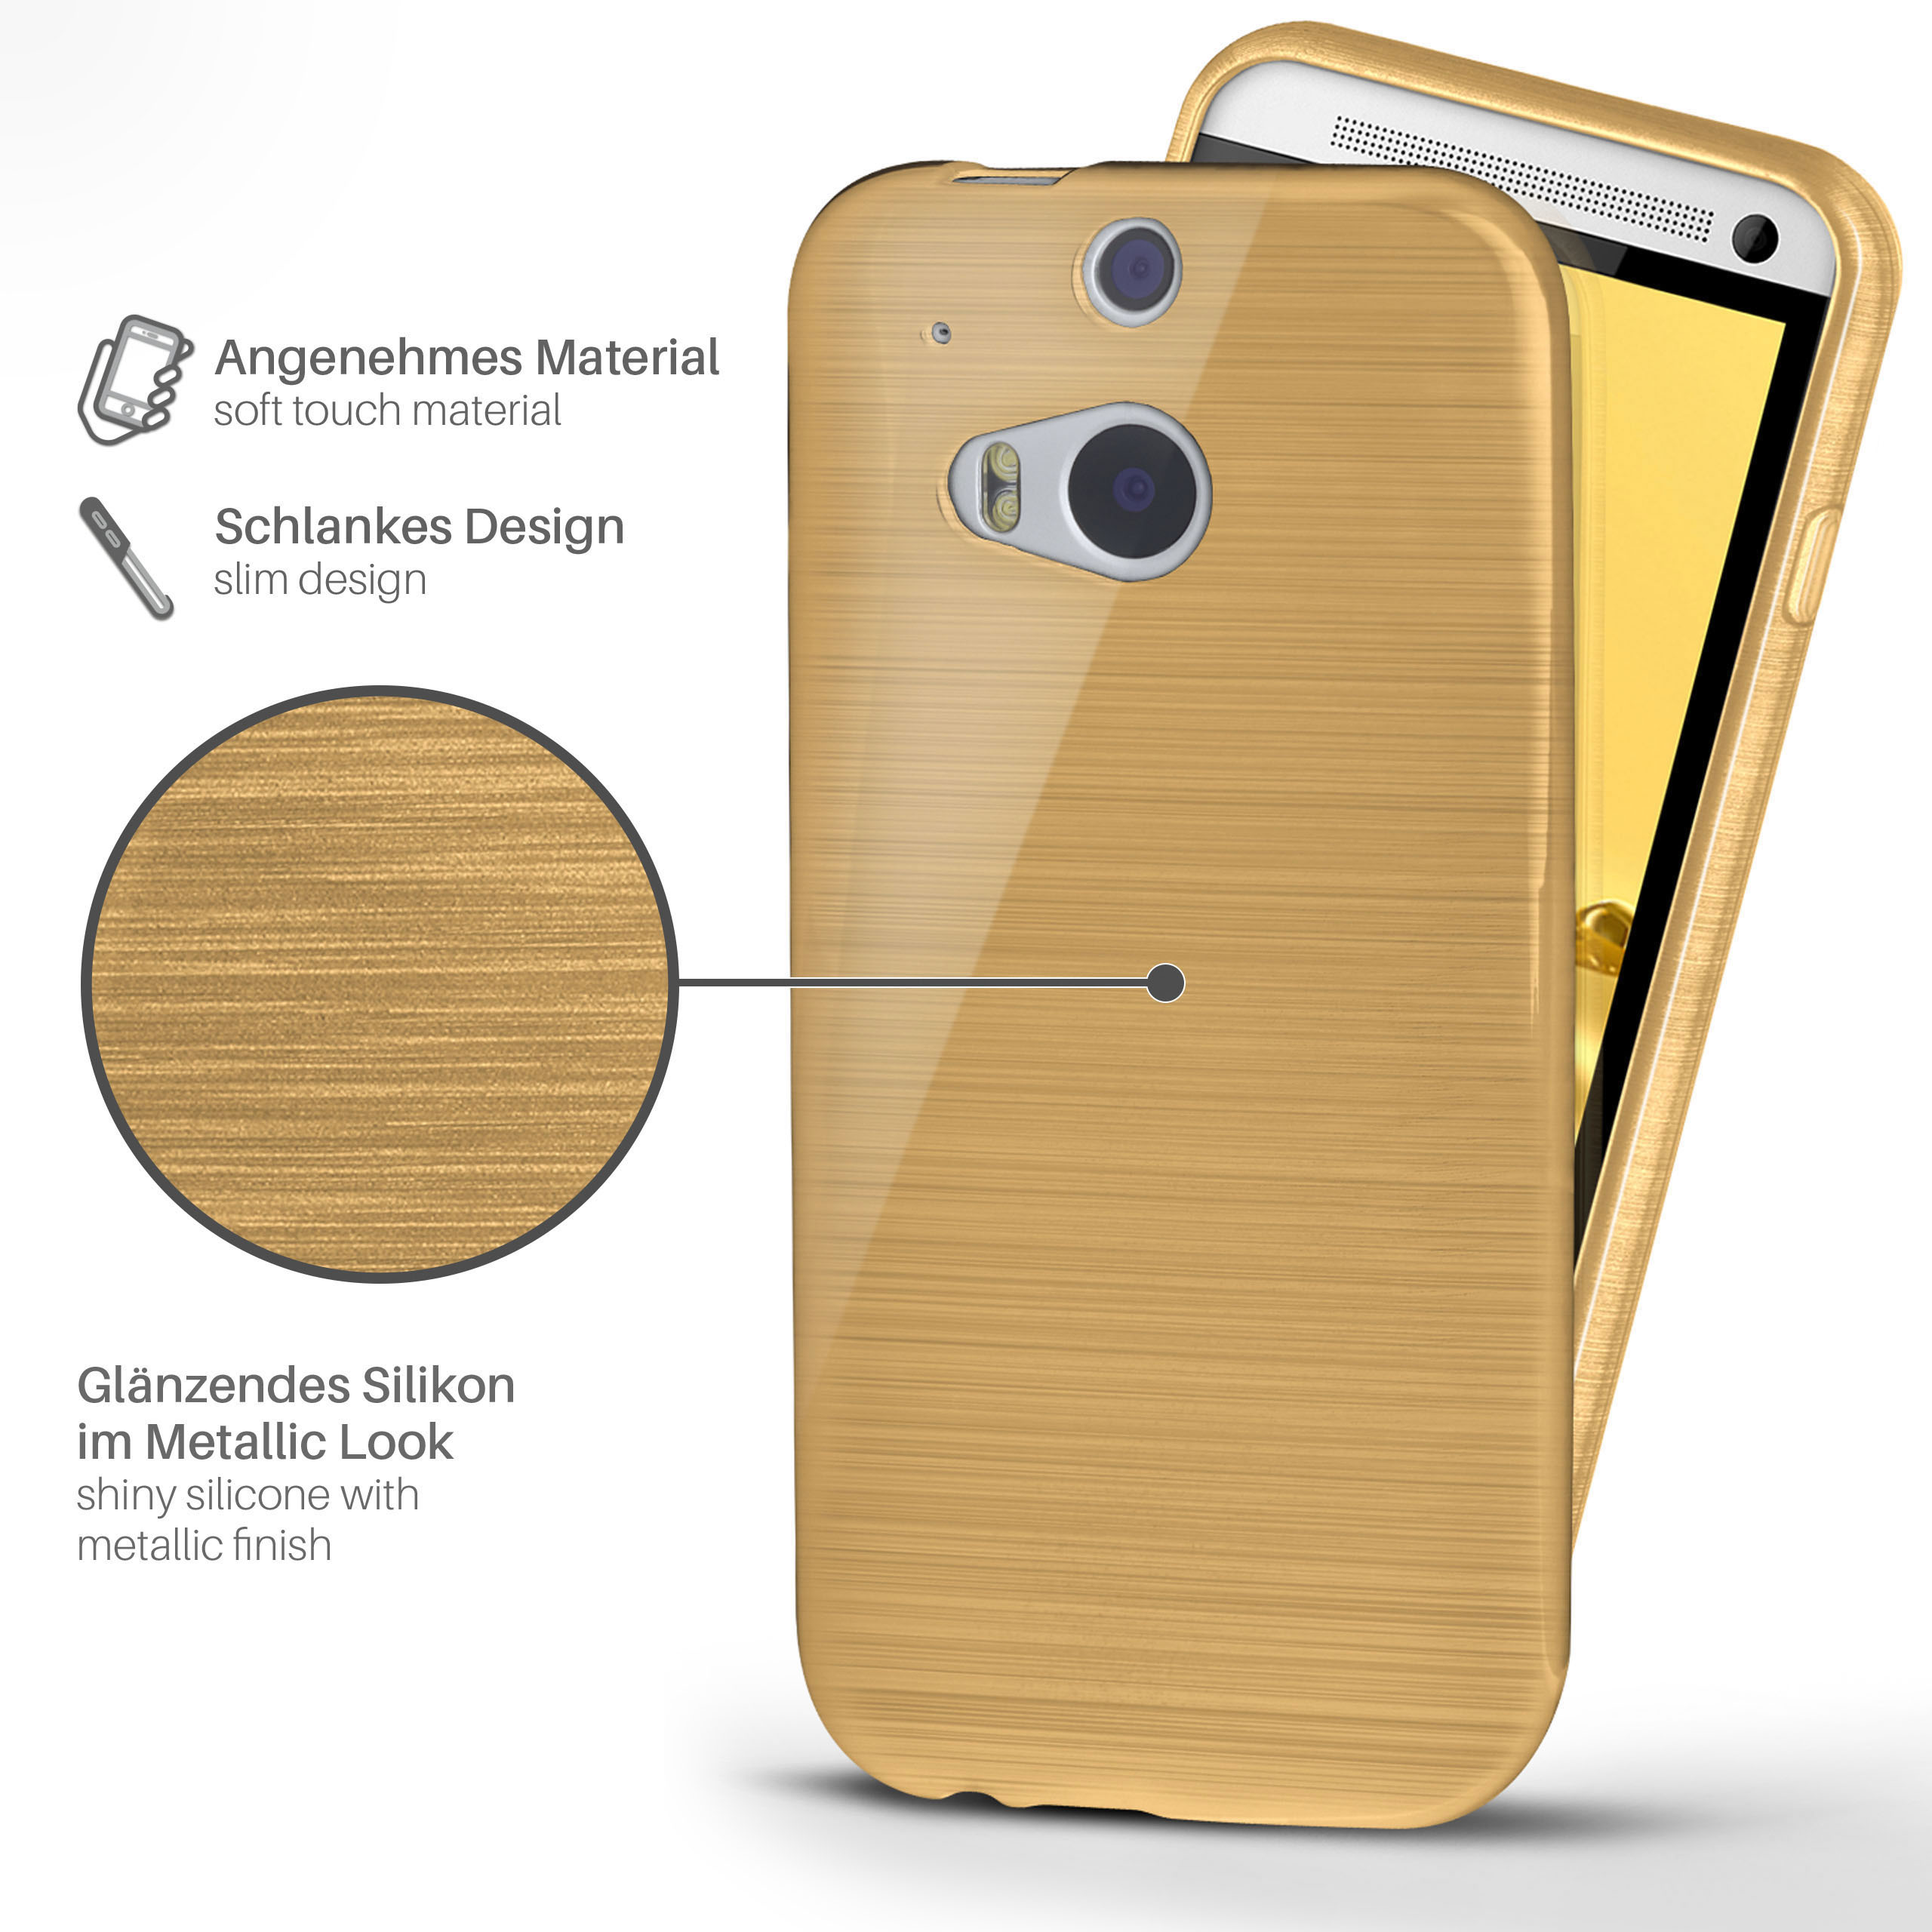 MOEX Brushed Case, / M8 One Ivory-Gold M8s, Backcover, HTC